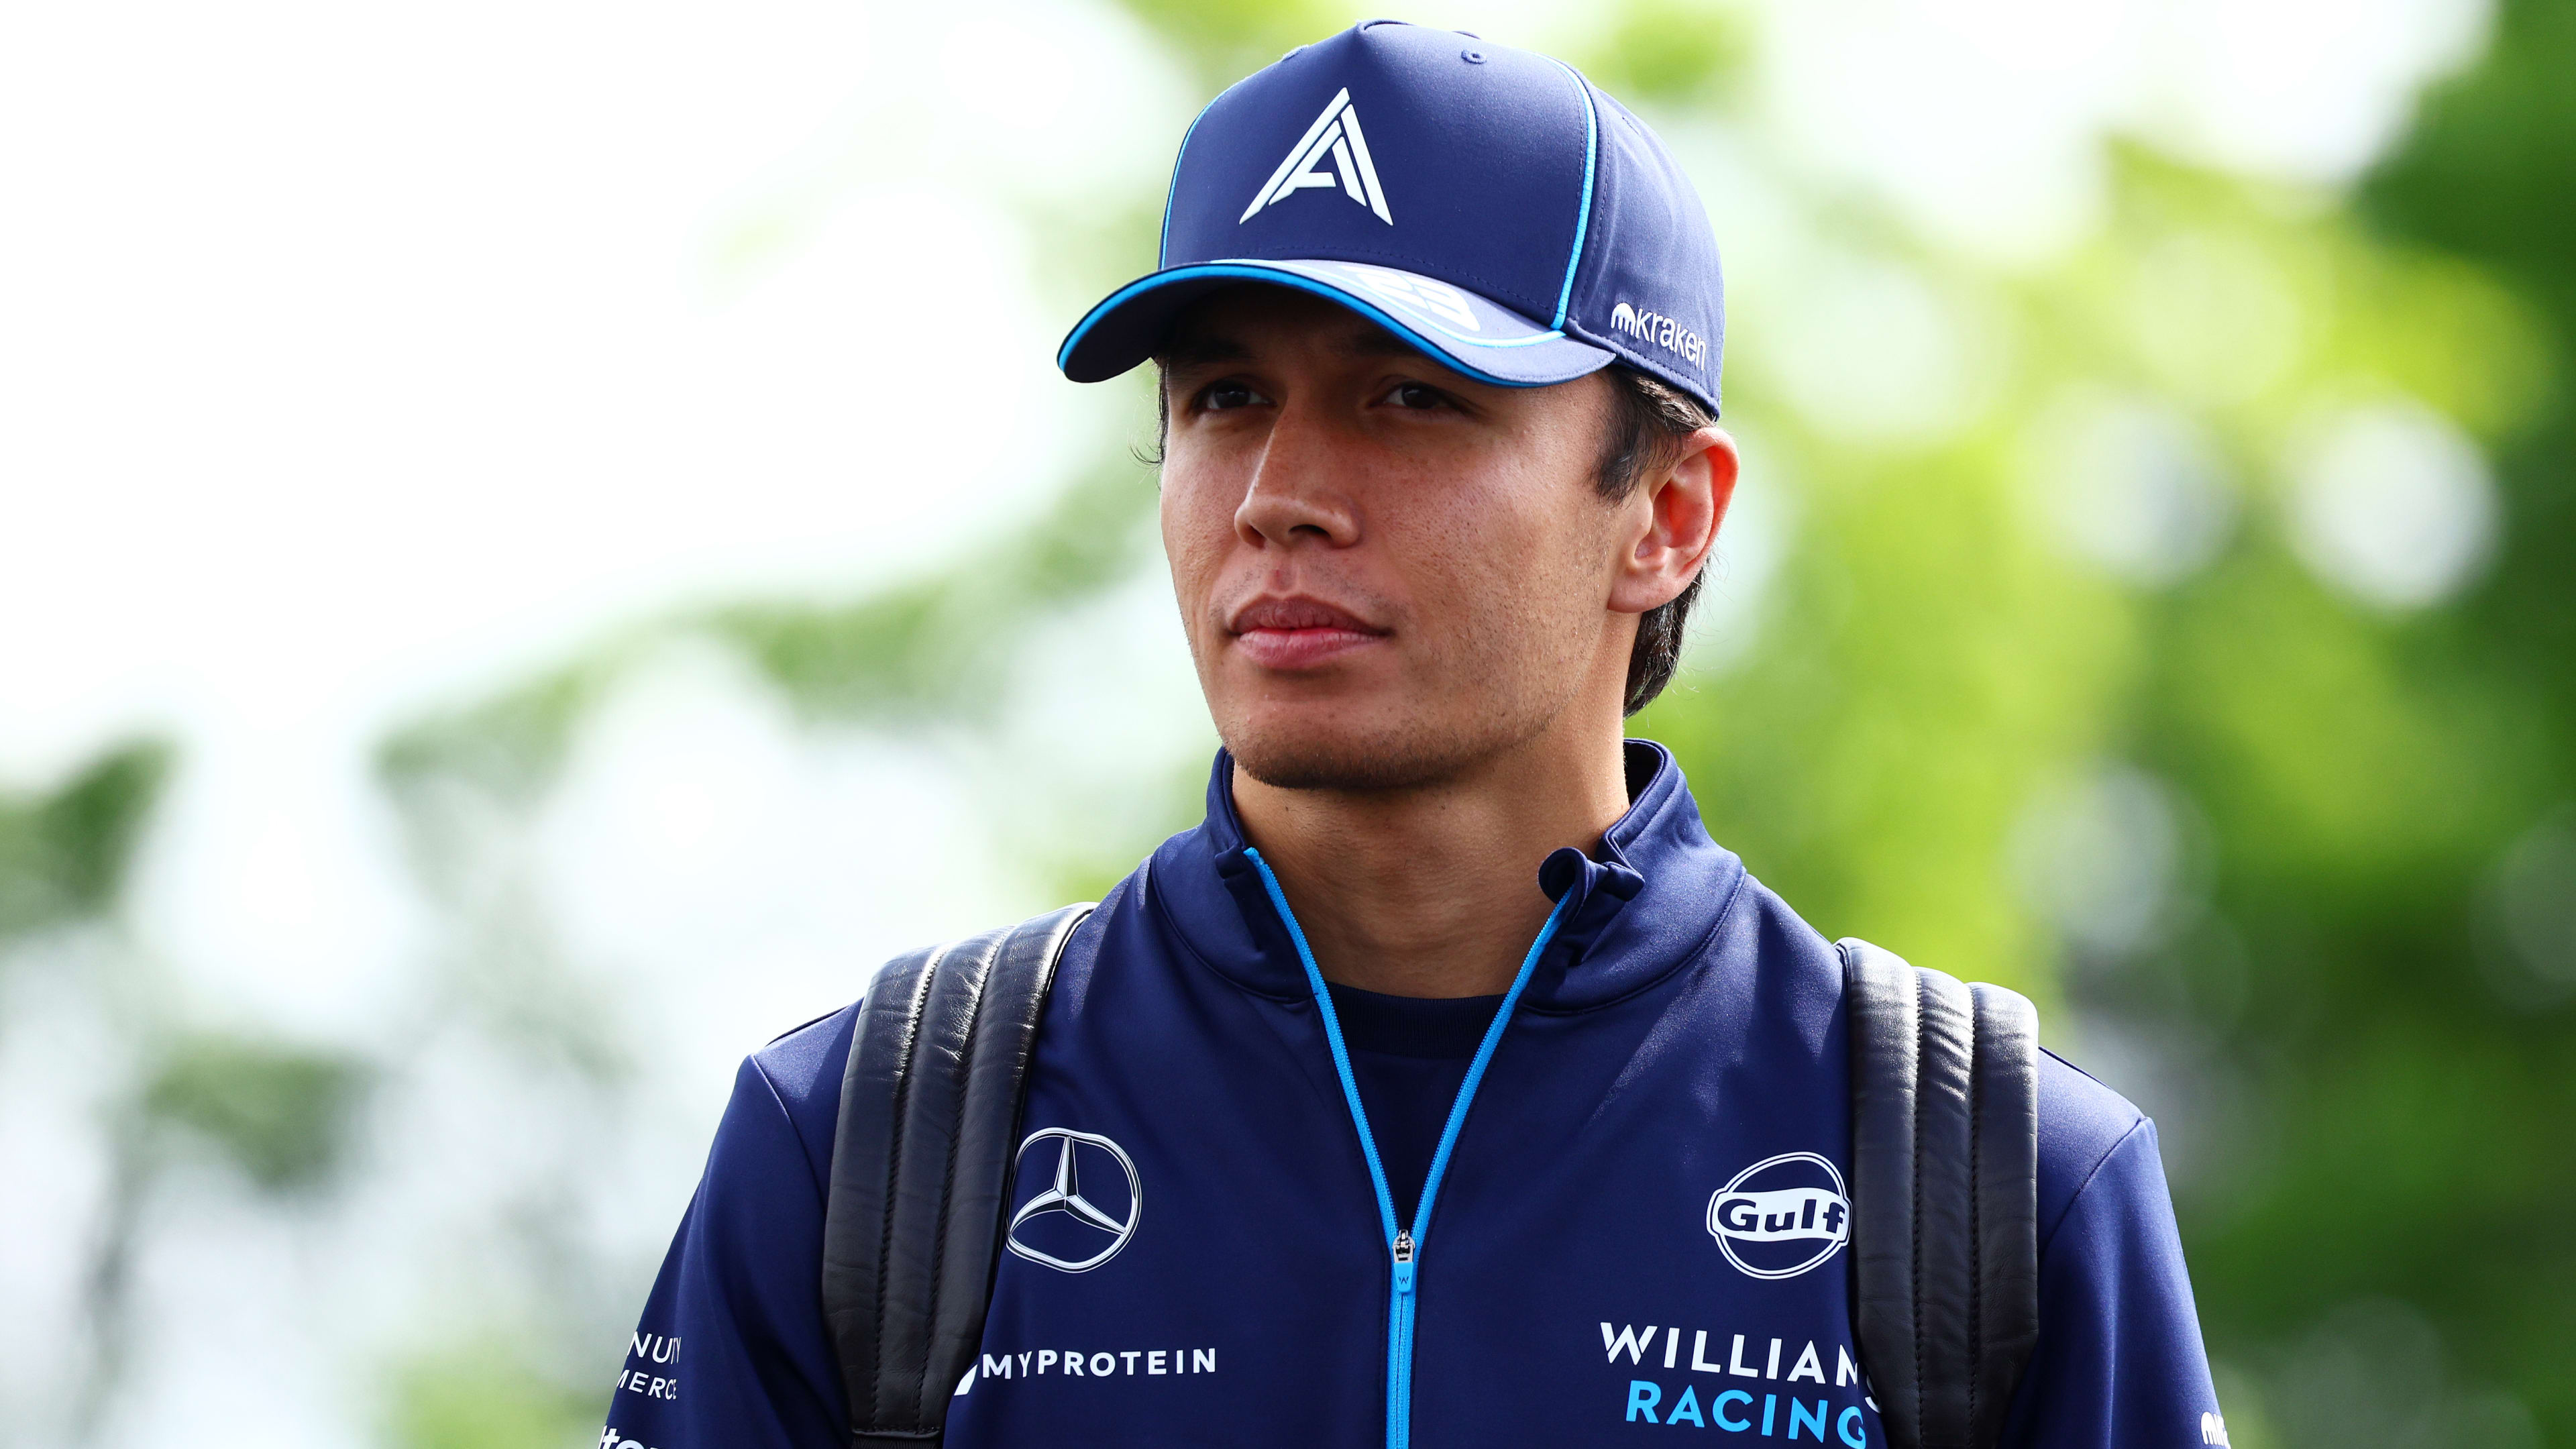 Albon has 'everything he needs' to be world champion as Williams hail his qualities